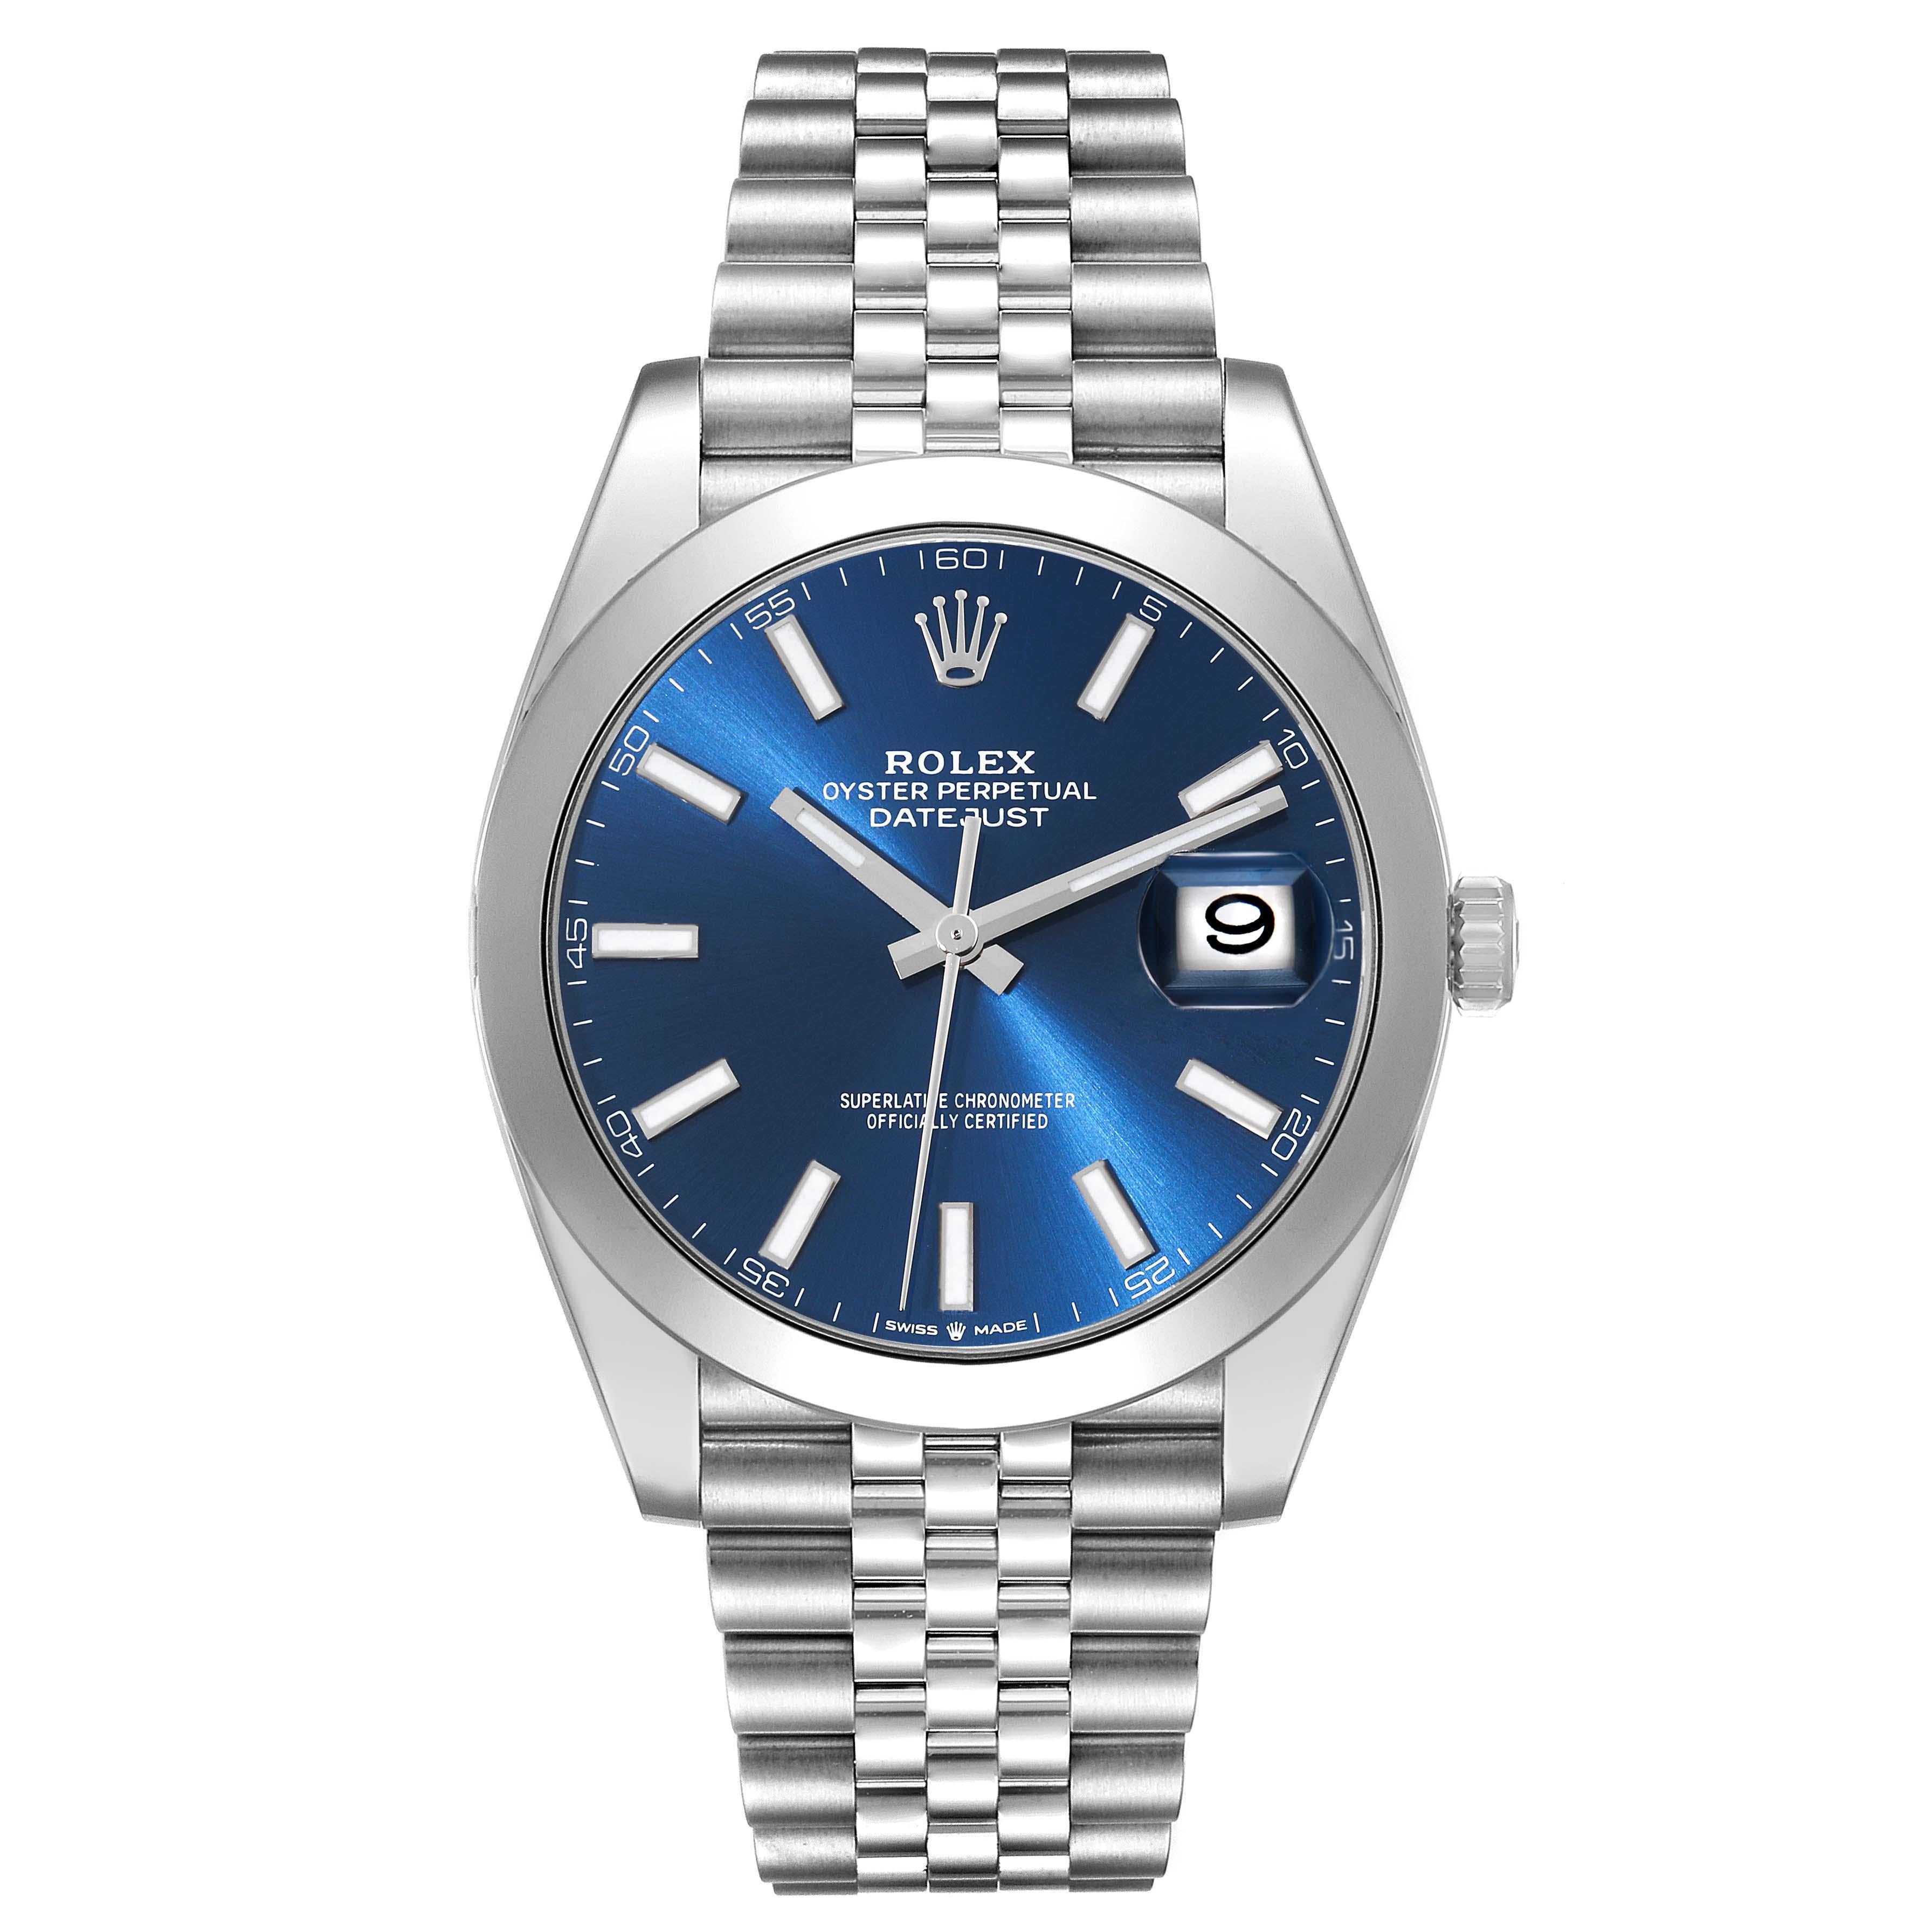 Rolex Datejust 41 Blue Dial Smooth Bezel Steel Mens Watch 126300 Unworn. Officially certified chronometer automatic self-winding movement. Stainless steel case 41 mm in diameter. Rolex logo on the crown. Stainless steel smooth bezel. Scratch